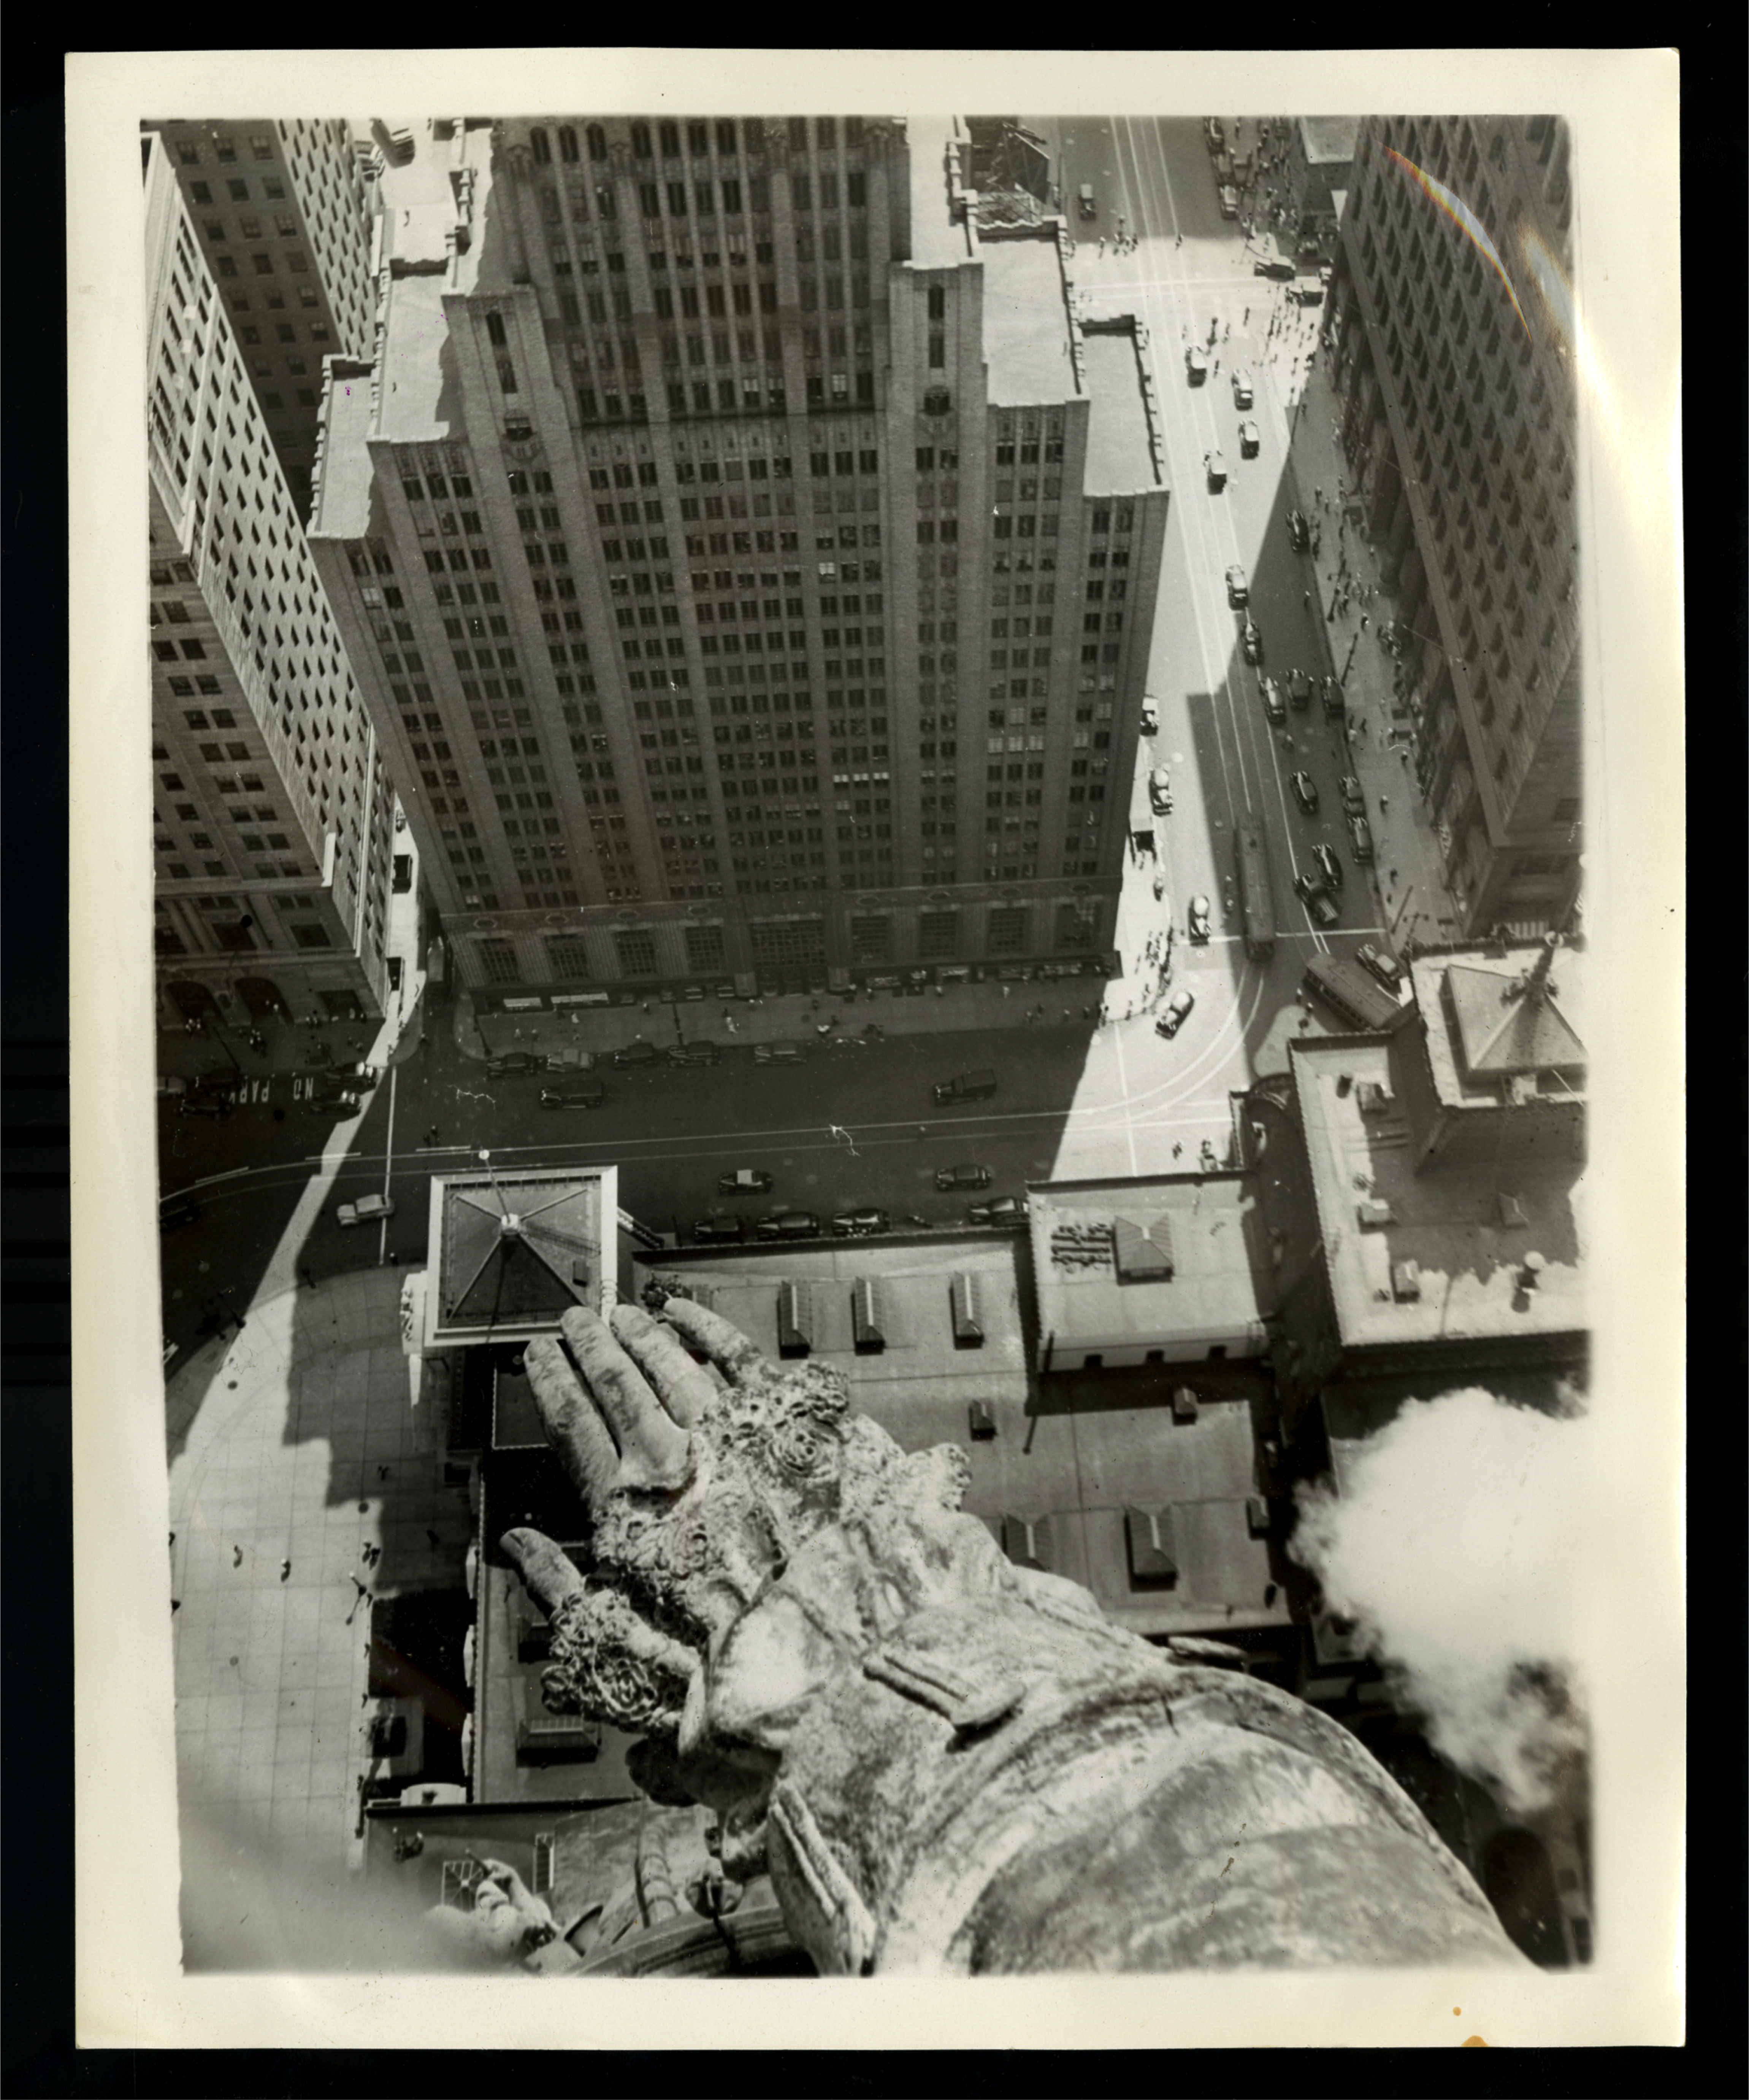 Aerial photograph from William Penn statue atop City Hall | Historical Society of Pennsylvania, Philadelphia Record Photograph Morgue